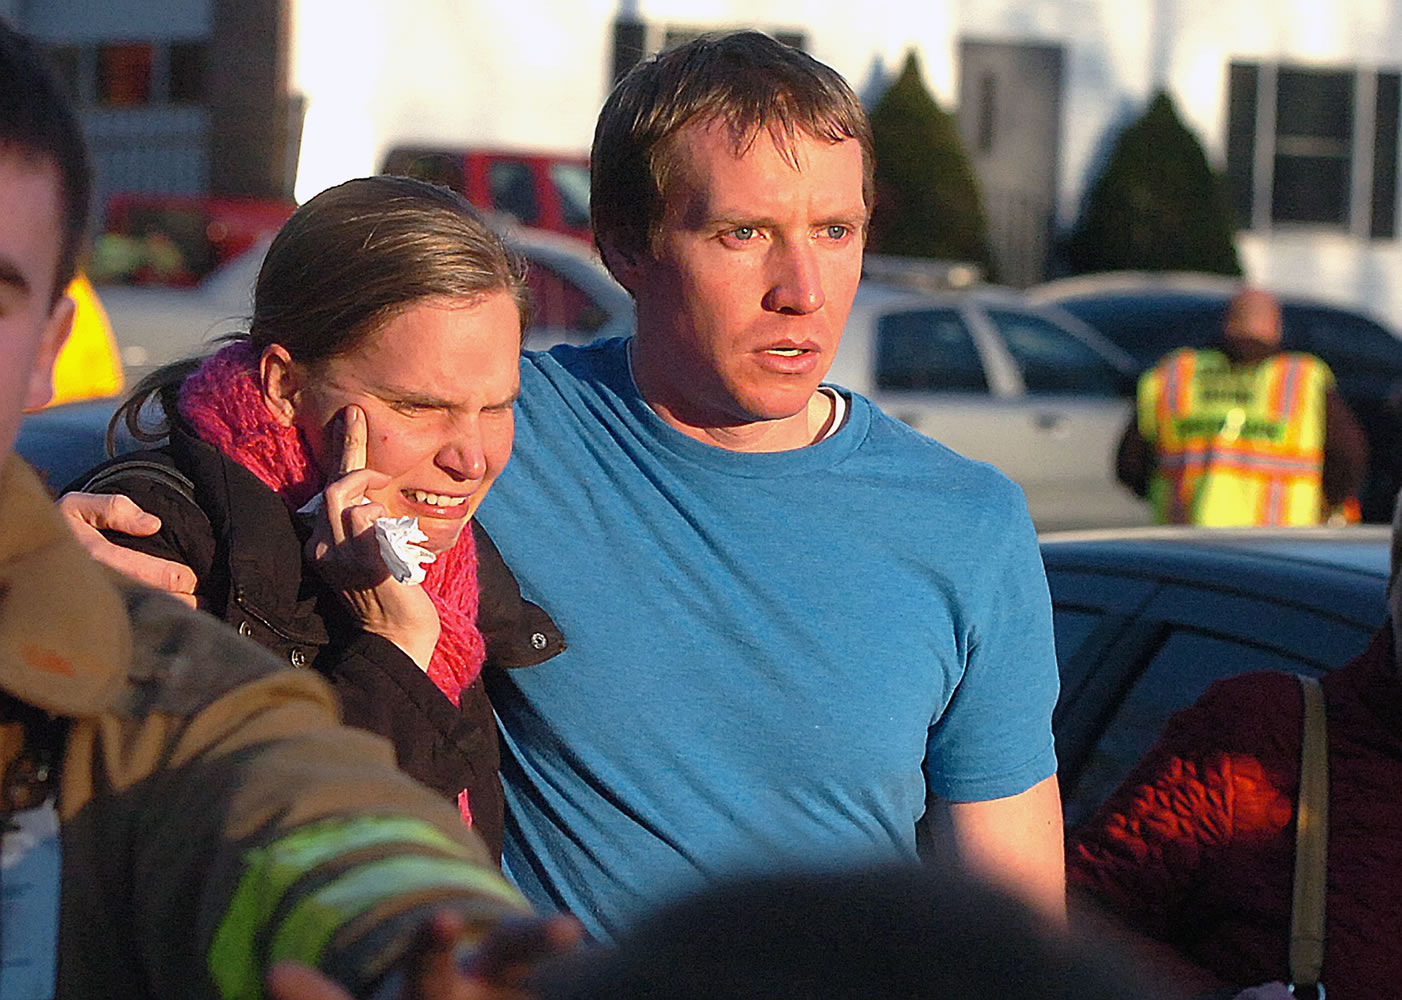 Robert and Alissa Parker leave the Sandy Hook Volunteer Fire House in tears after learning that their daughter Emilie was one of the children killed in a shooting at the Sandy Hook Elementary School, Friday morning, Dec. 14, 2012 in Newtown, Conn.